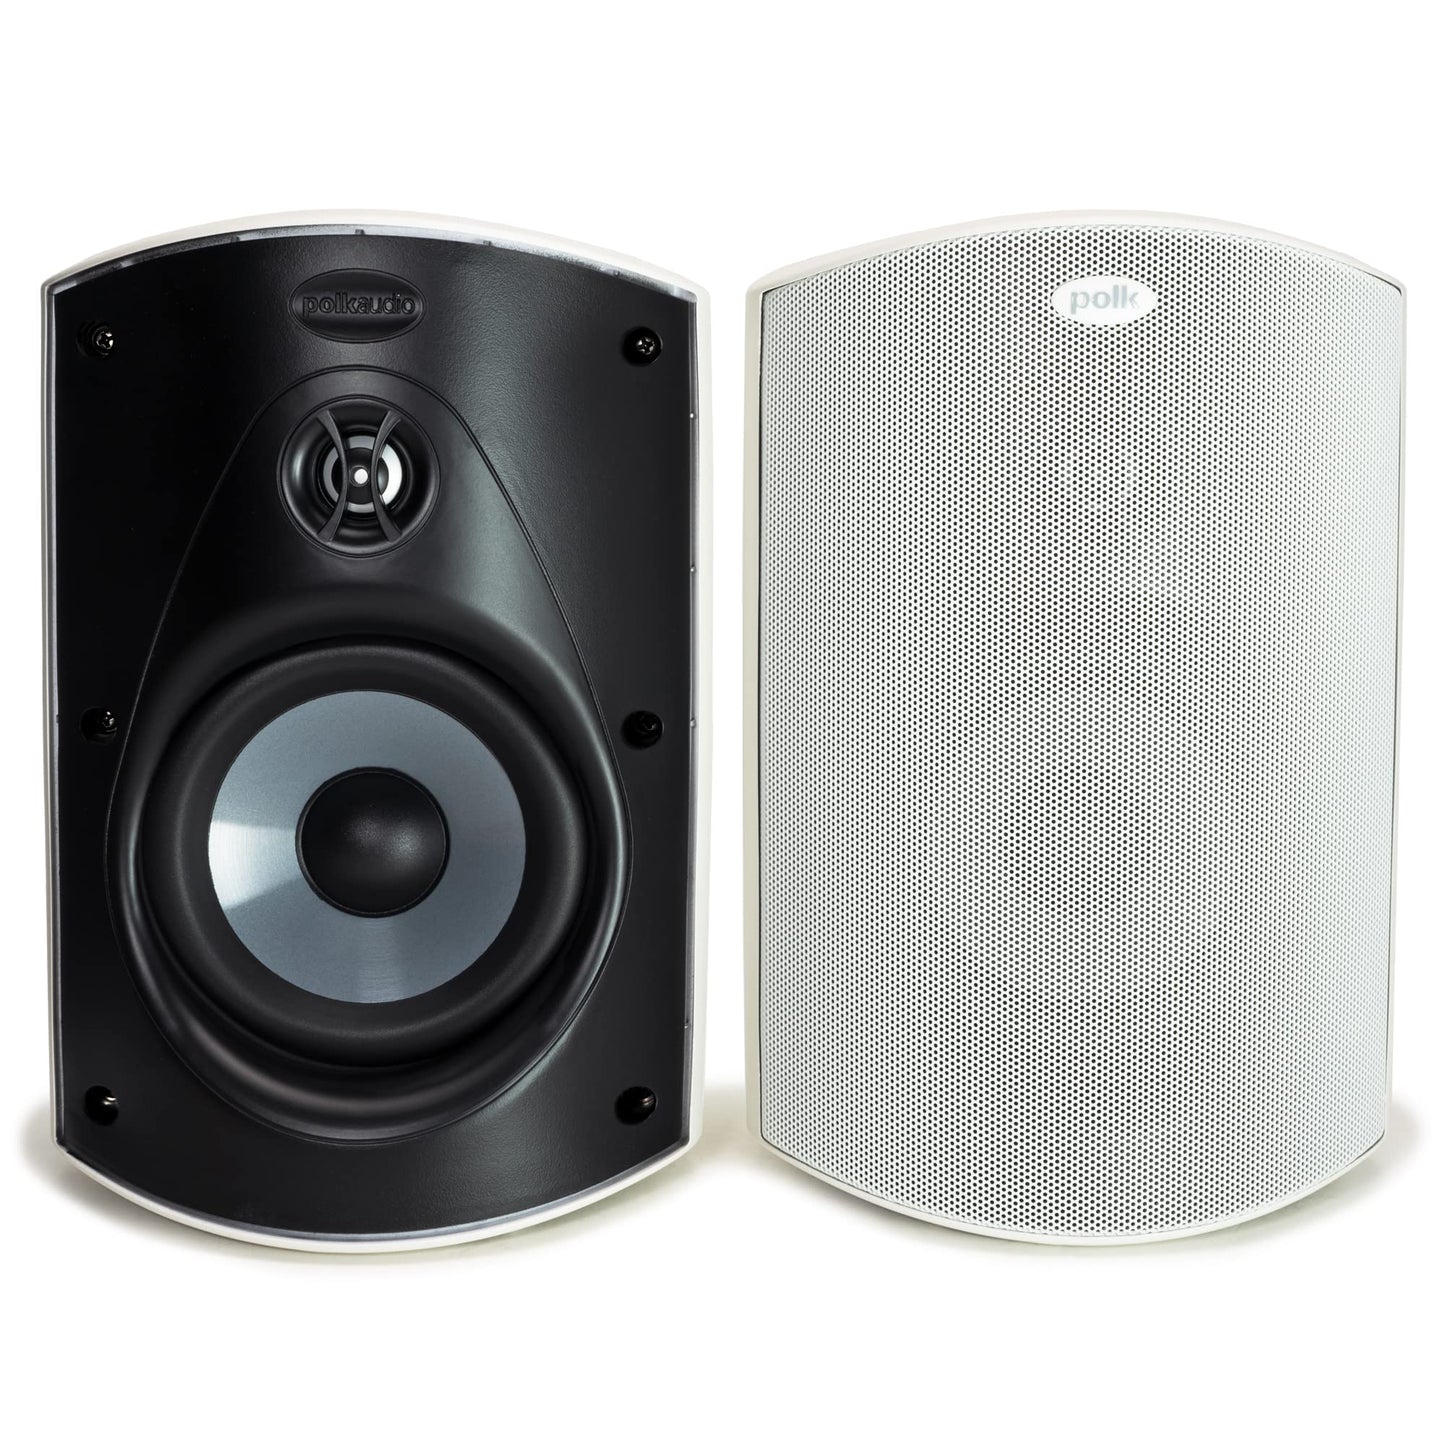 Polk Audio Atrium 5 Outdoor Speakers with Powerful Bass (Pair, White), All-Weather Durability, Broad Sound Coverage, Speed-Lock Mounting System